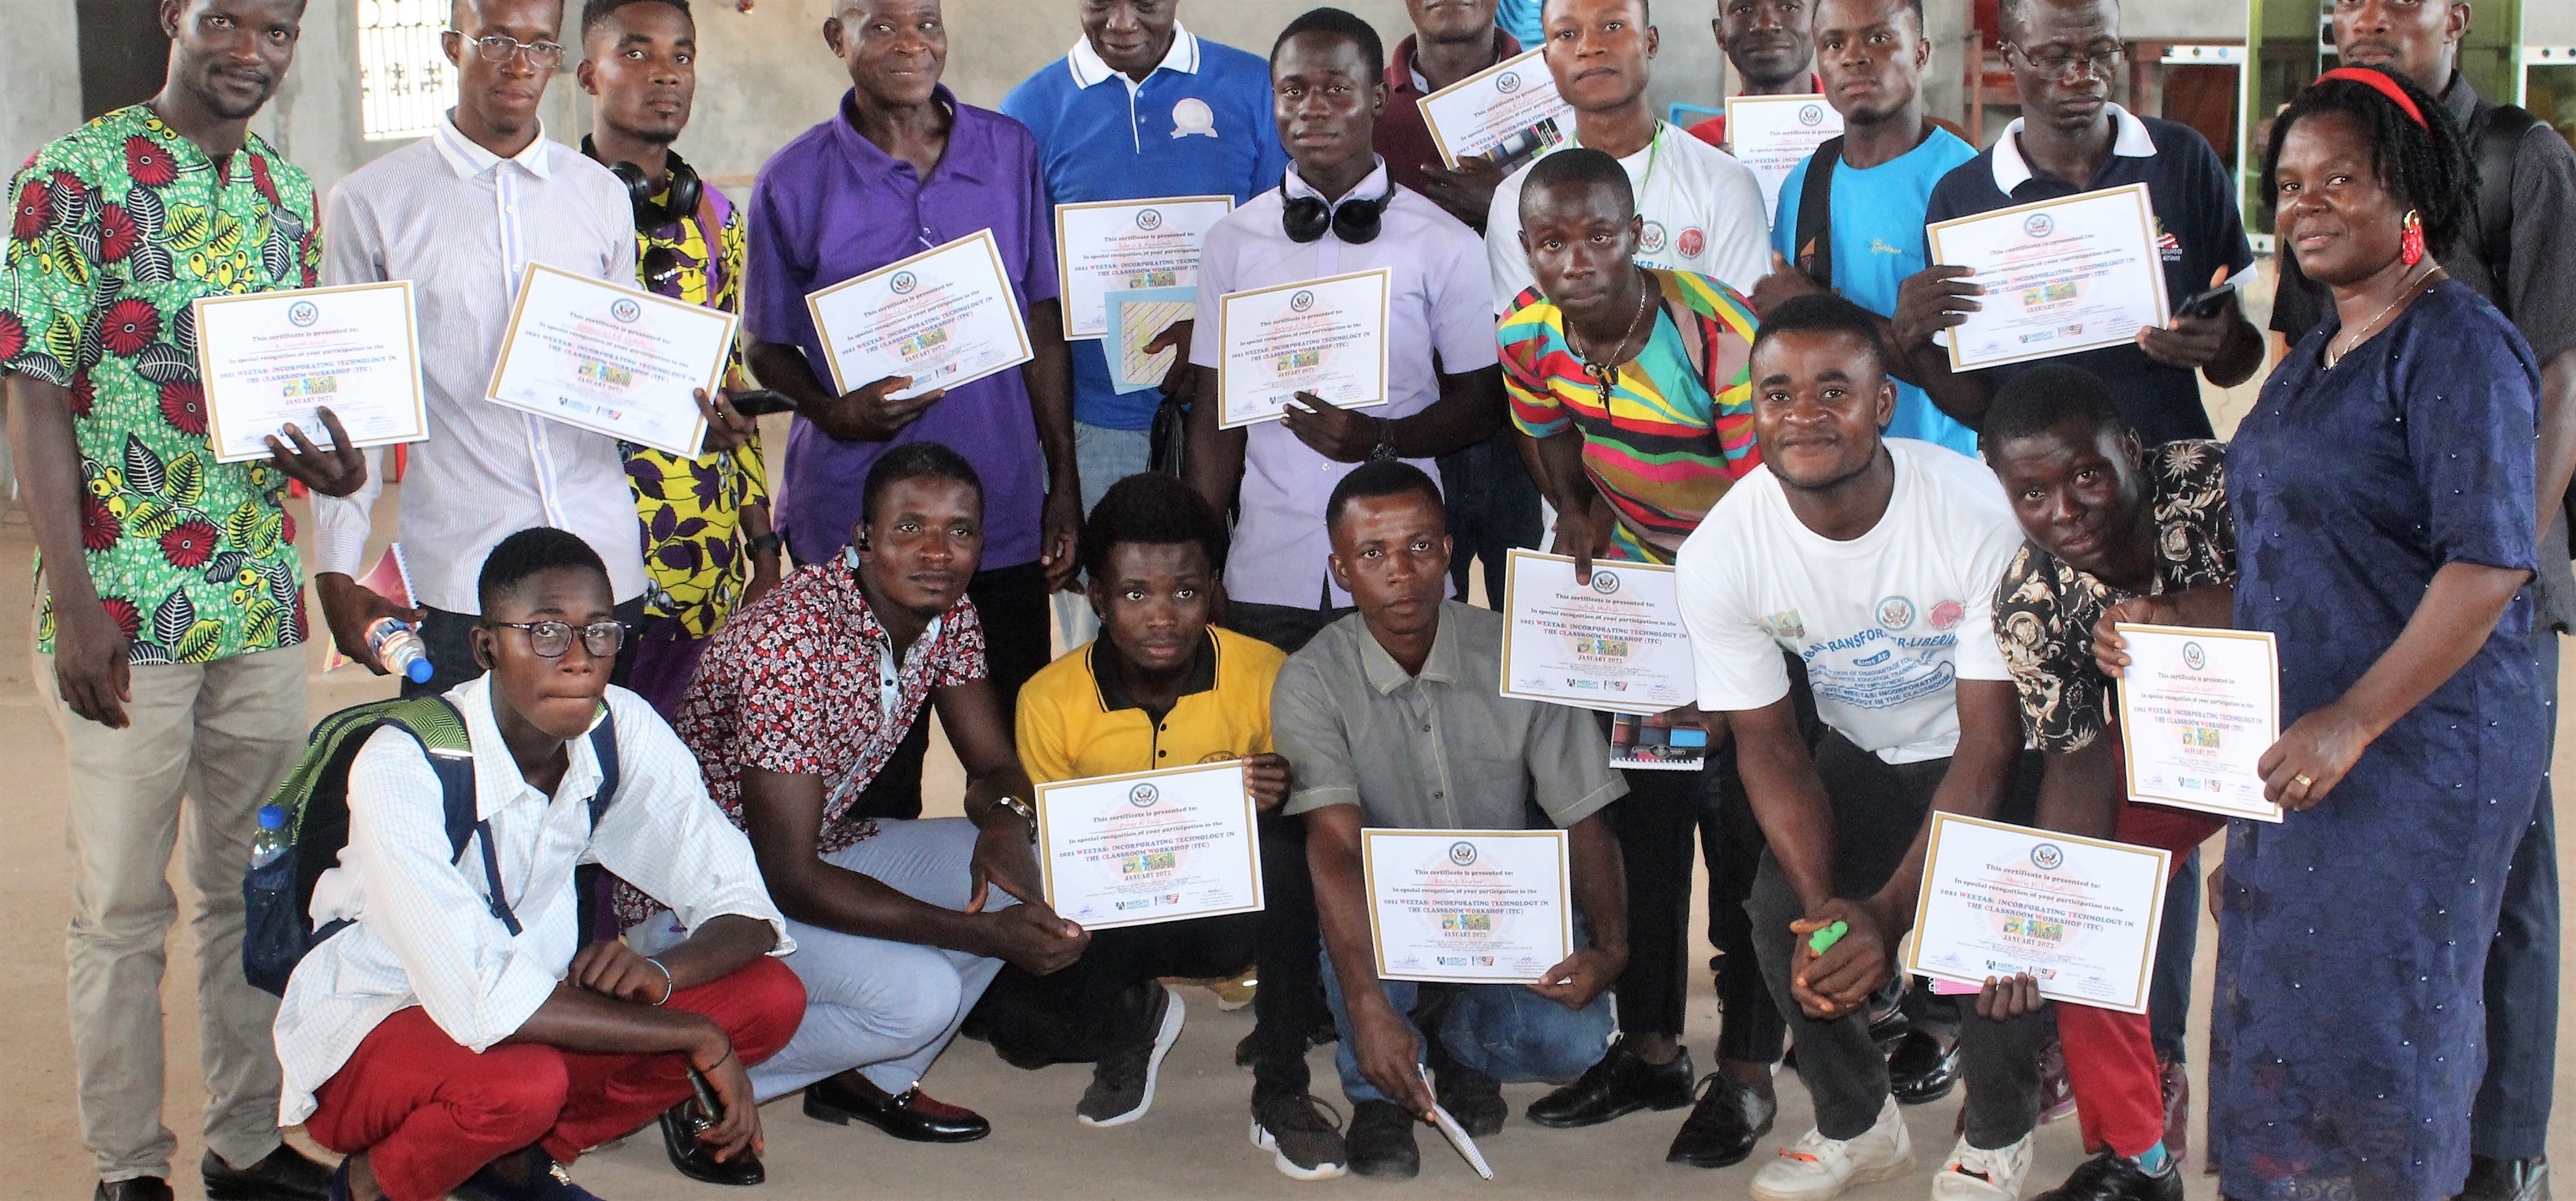 Participants with certificates